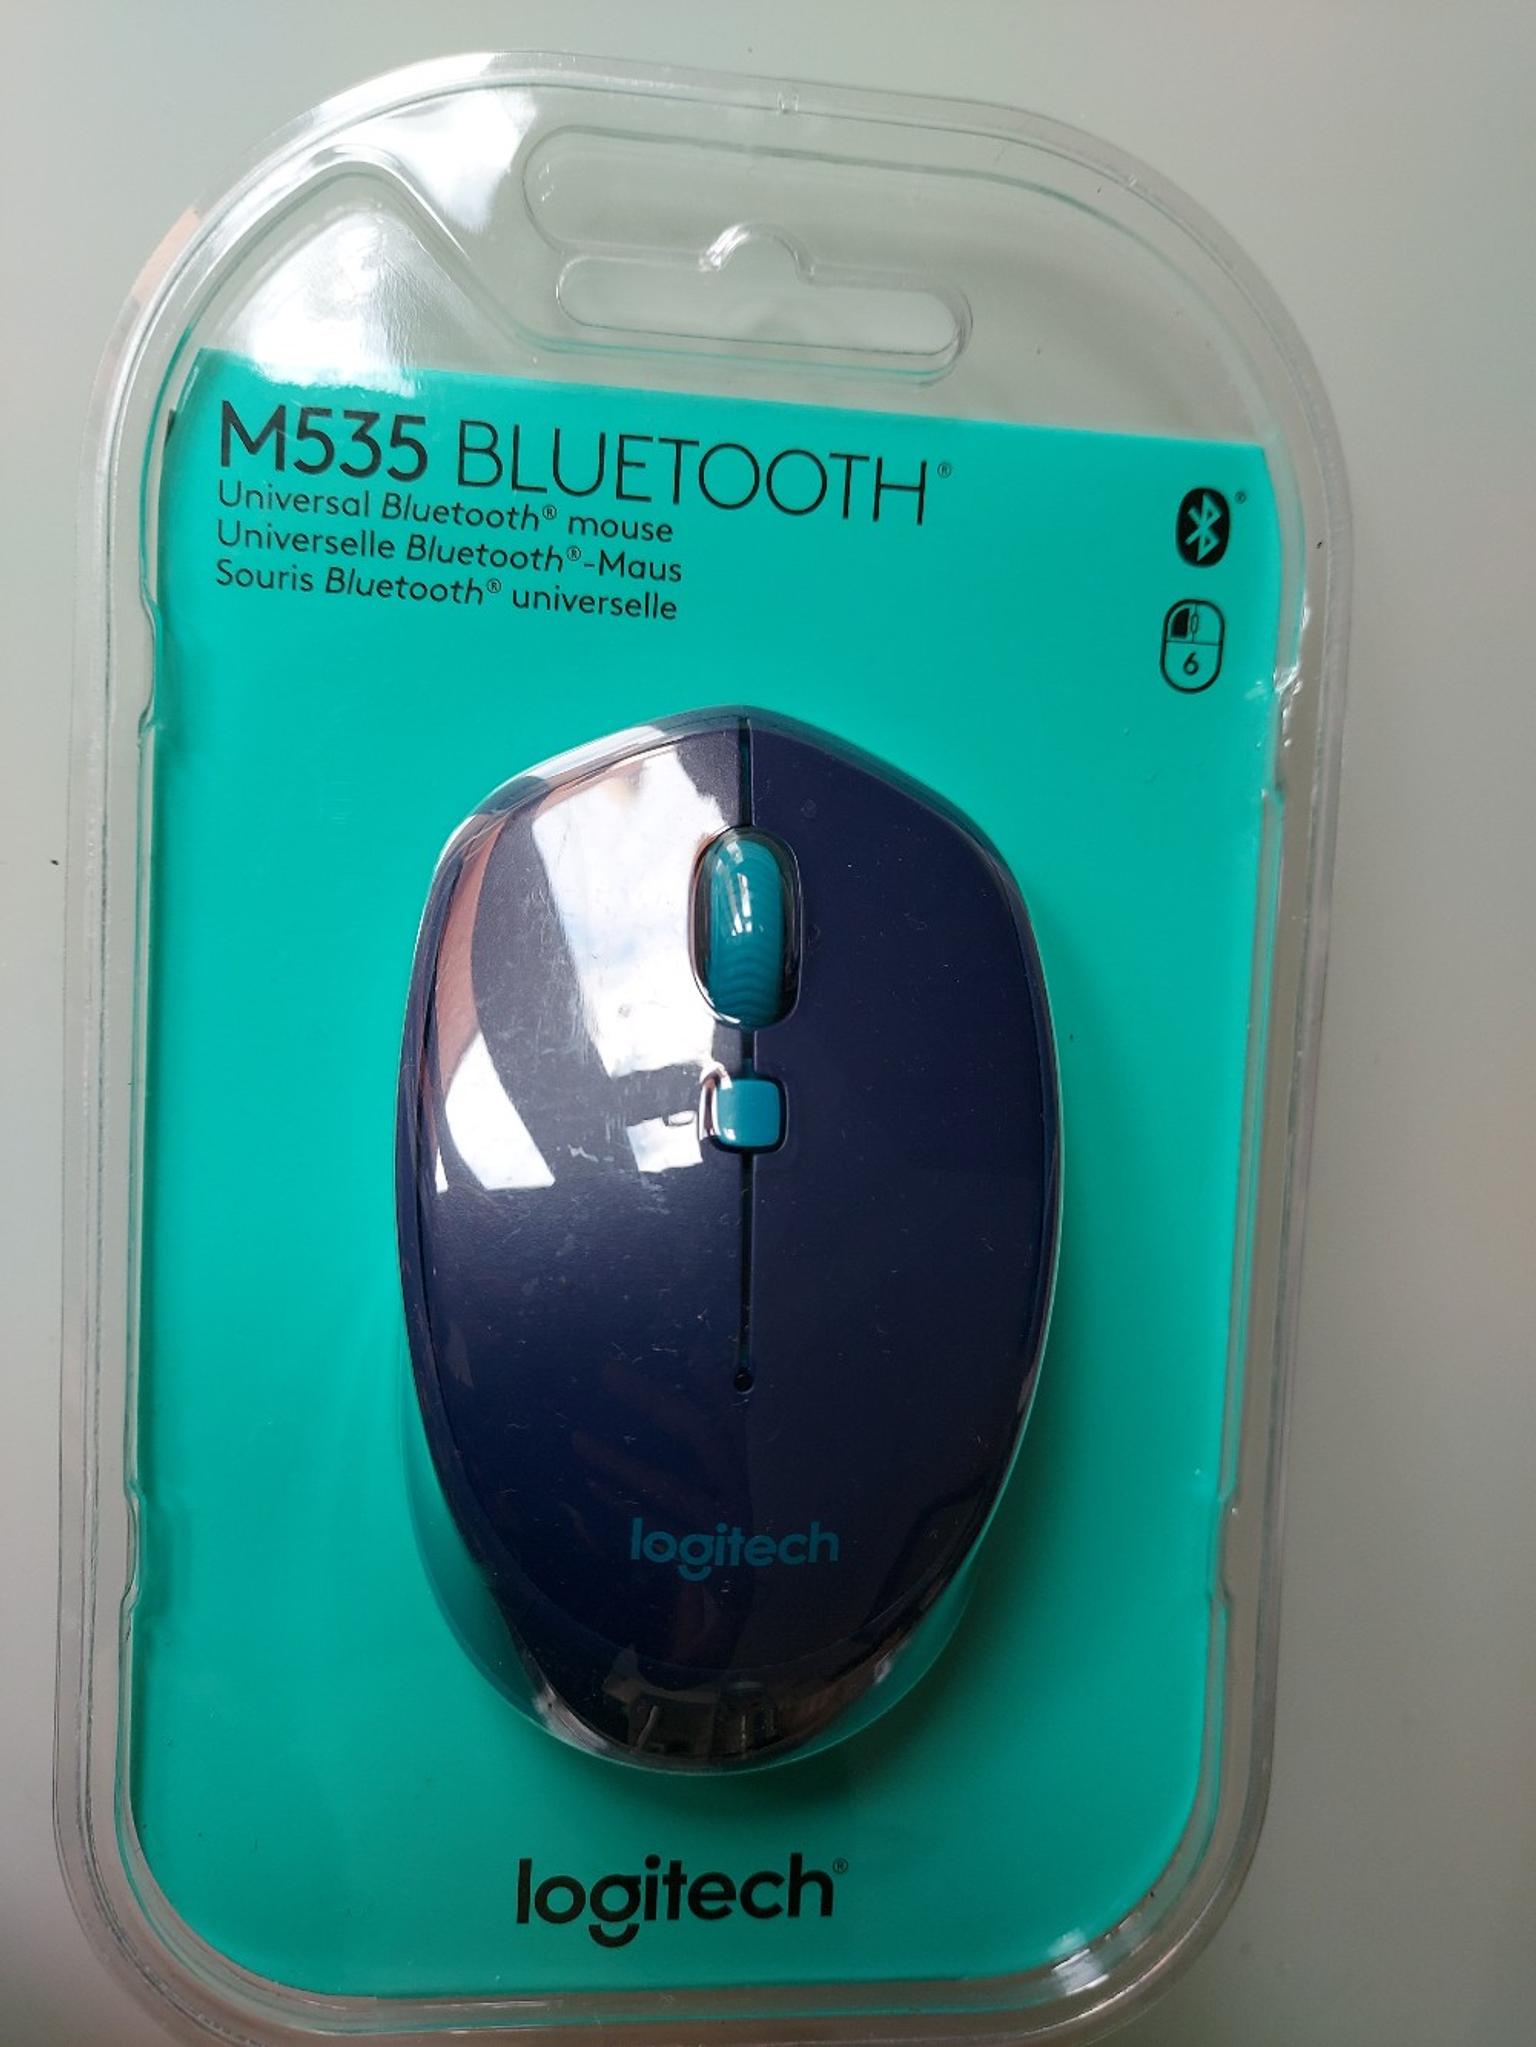 Bluetooth Mouse Compact New Logitech In High Wycombe For 15 00 For Sale Shpock